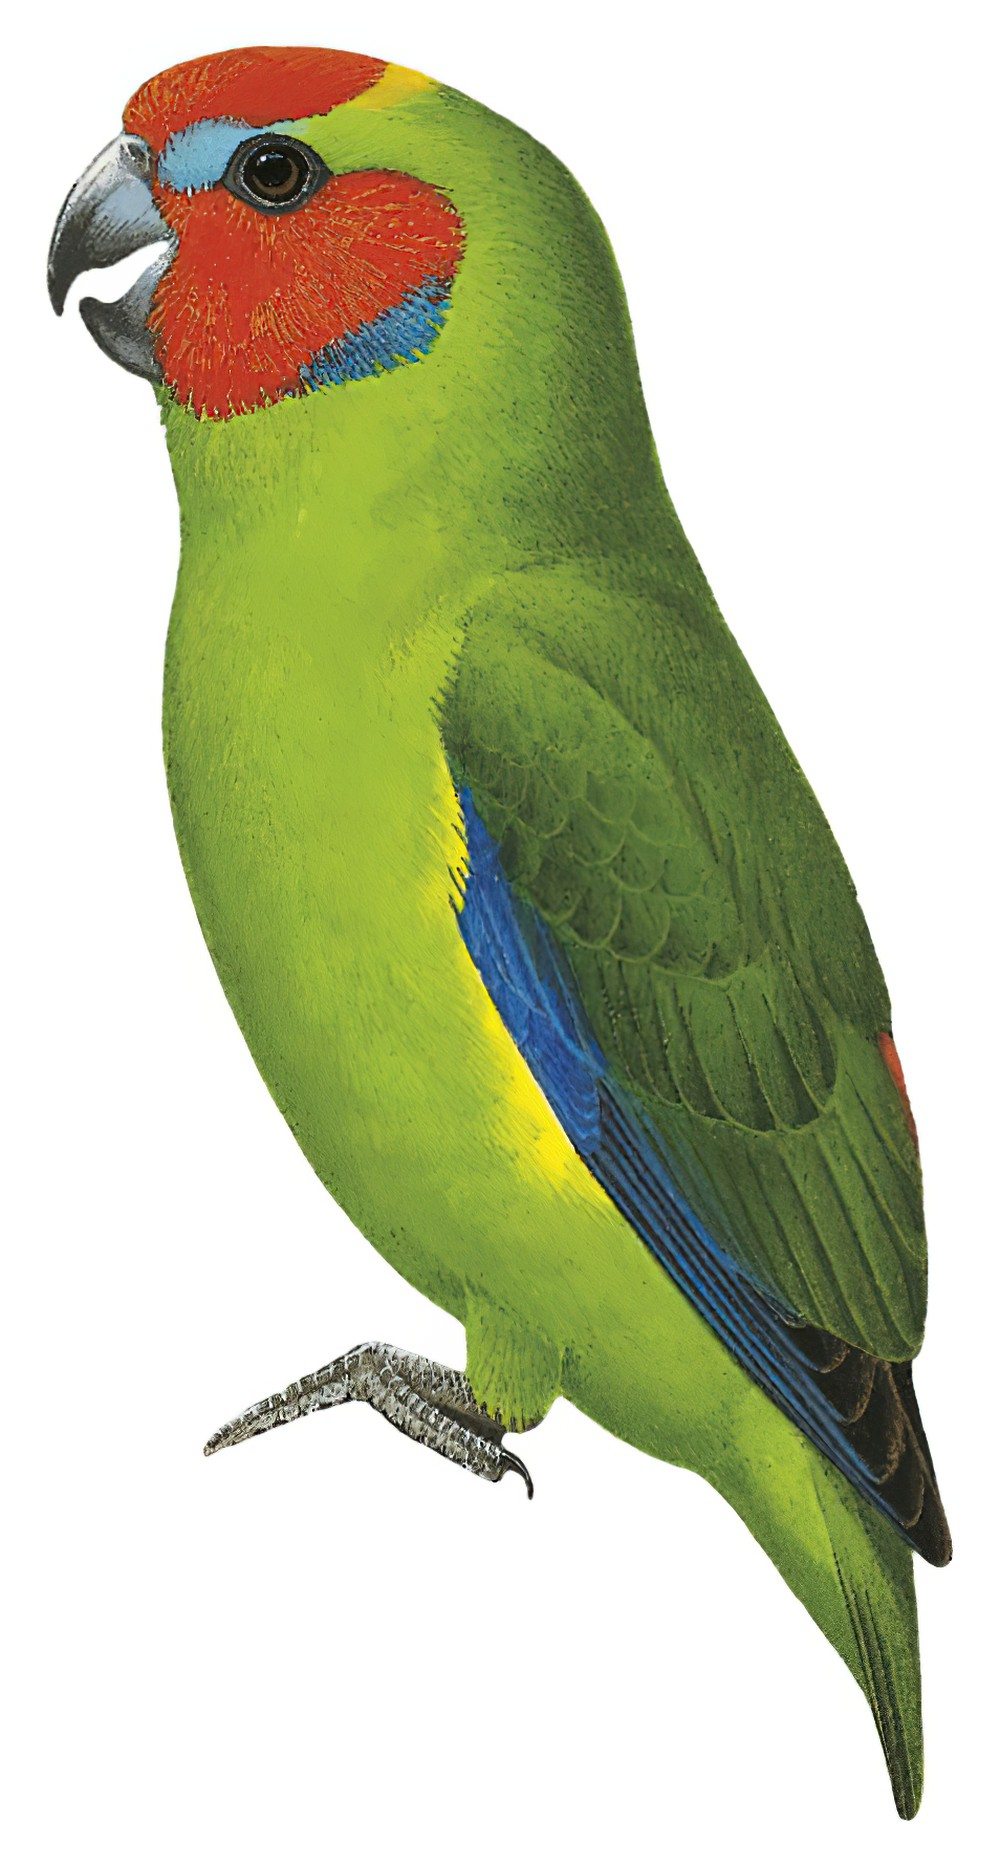 Double-eyed Fig-Parrot / Cyclopsitta diophthalma